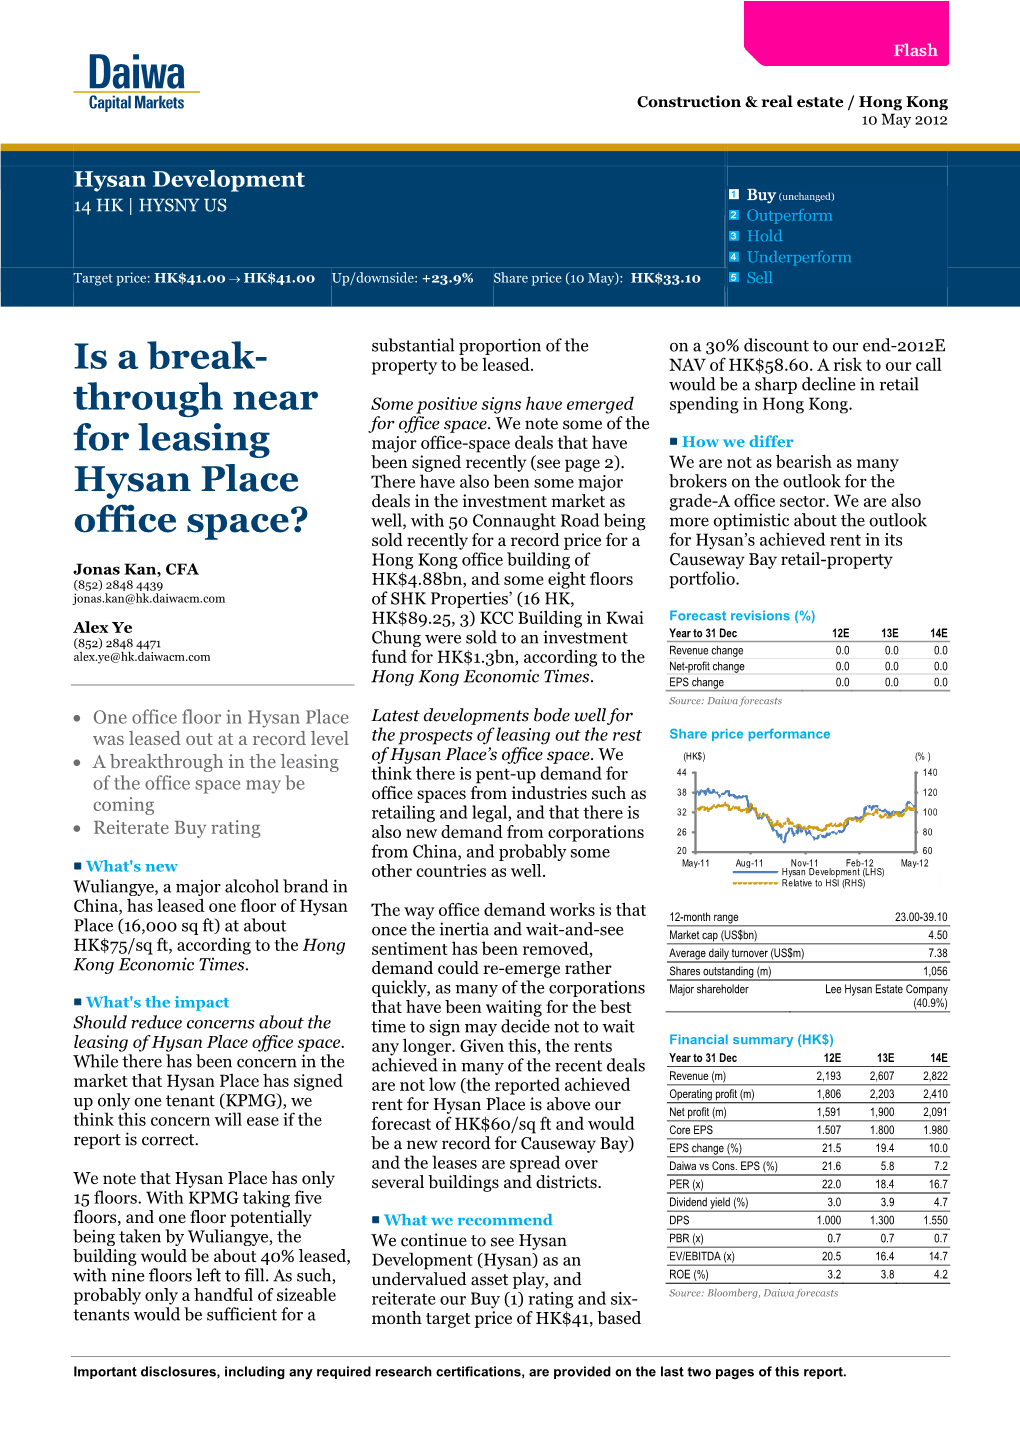 Through Near for Leasing Hysan Place Office Space?